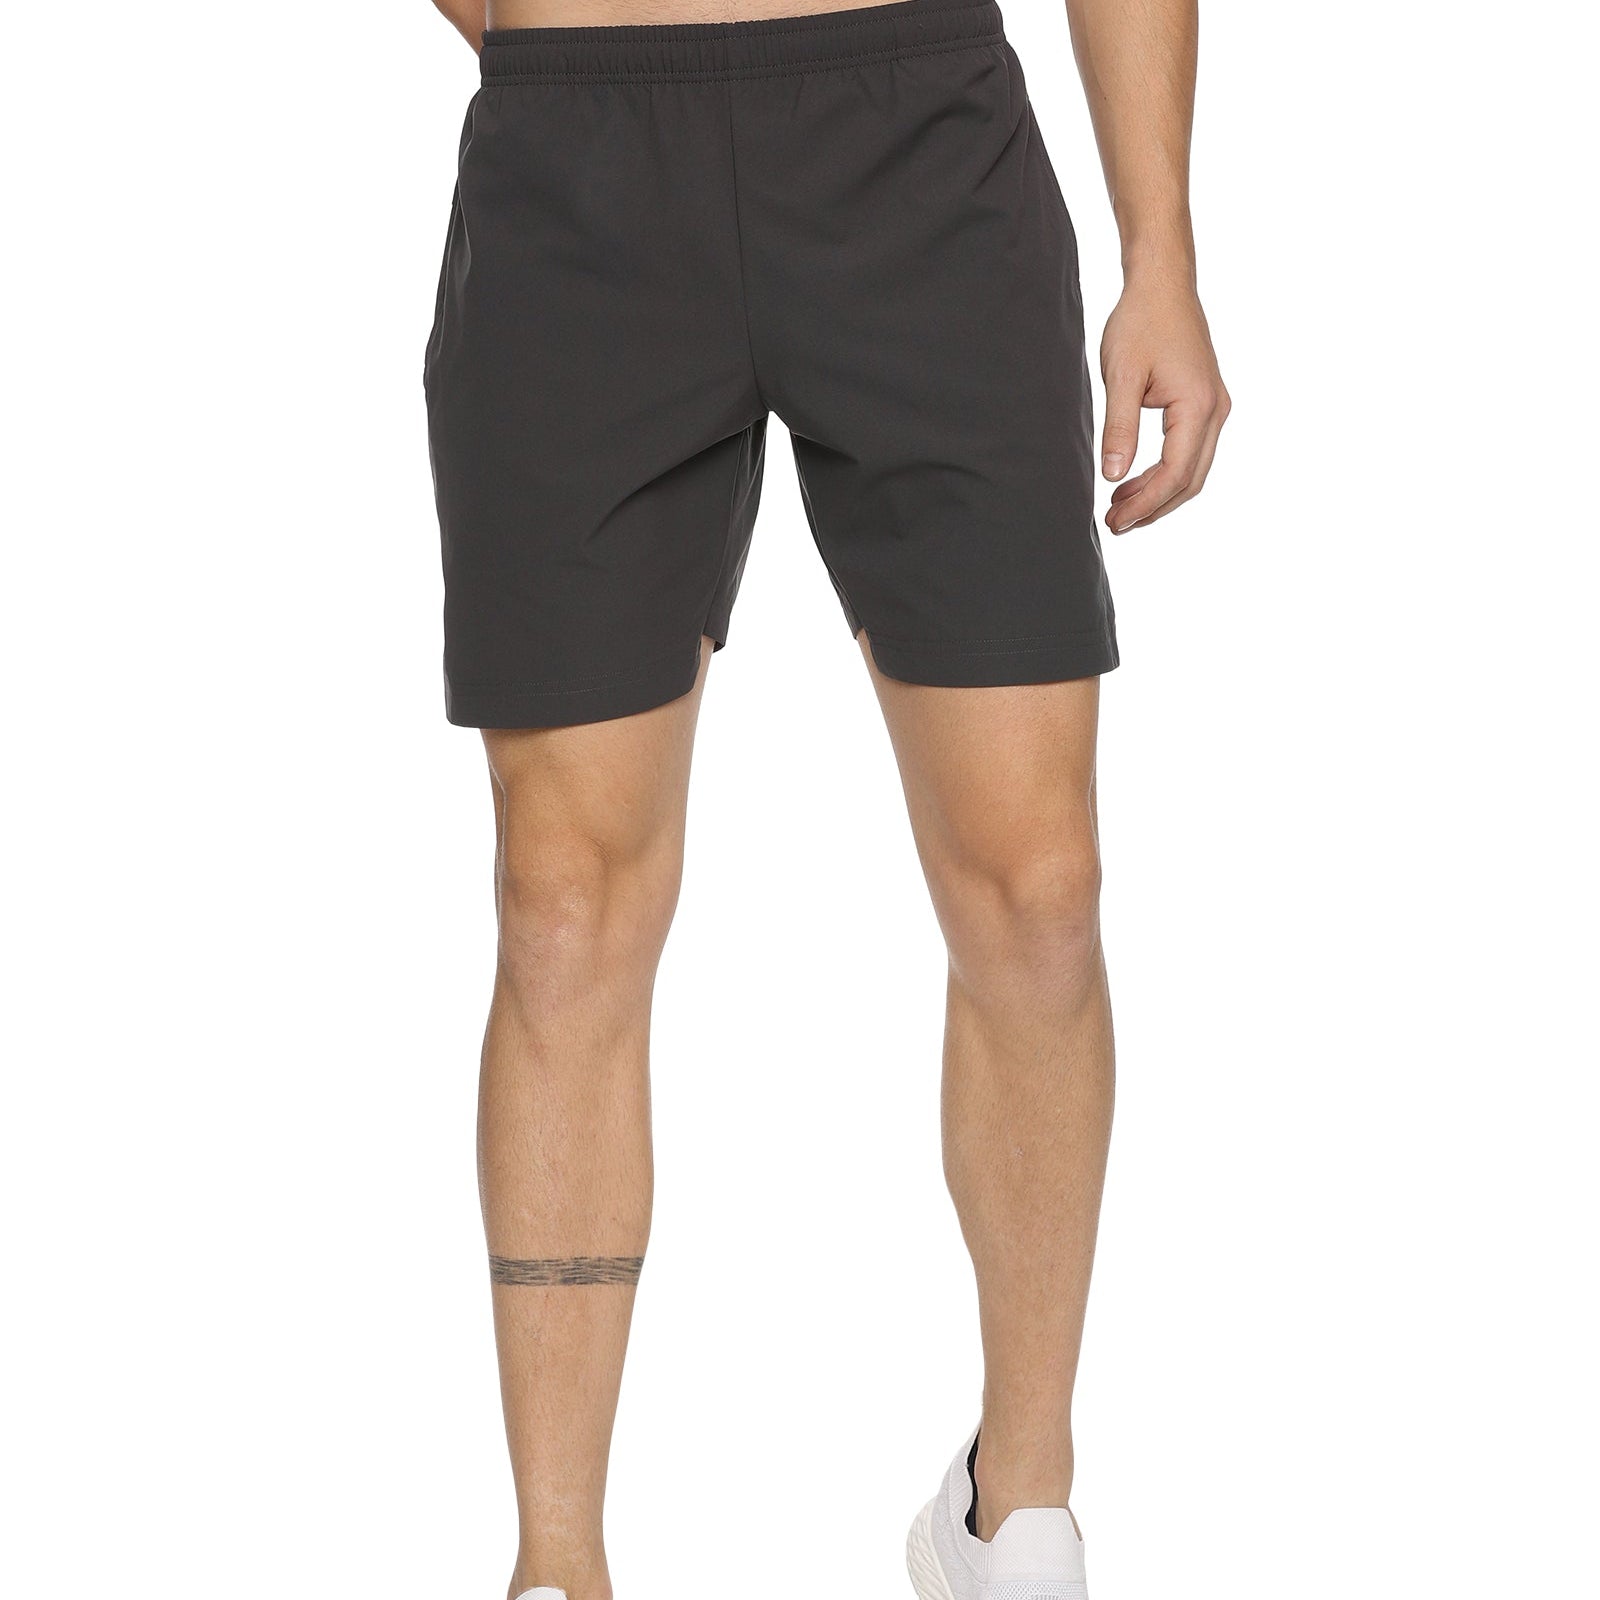 Men's Solid Training Shorts with Elasticated Drawstring